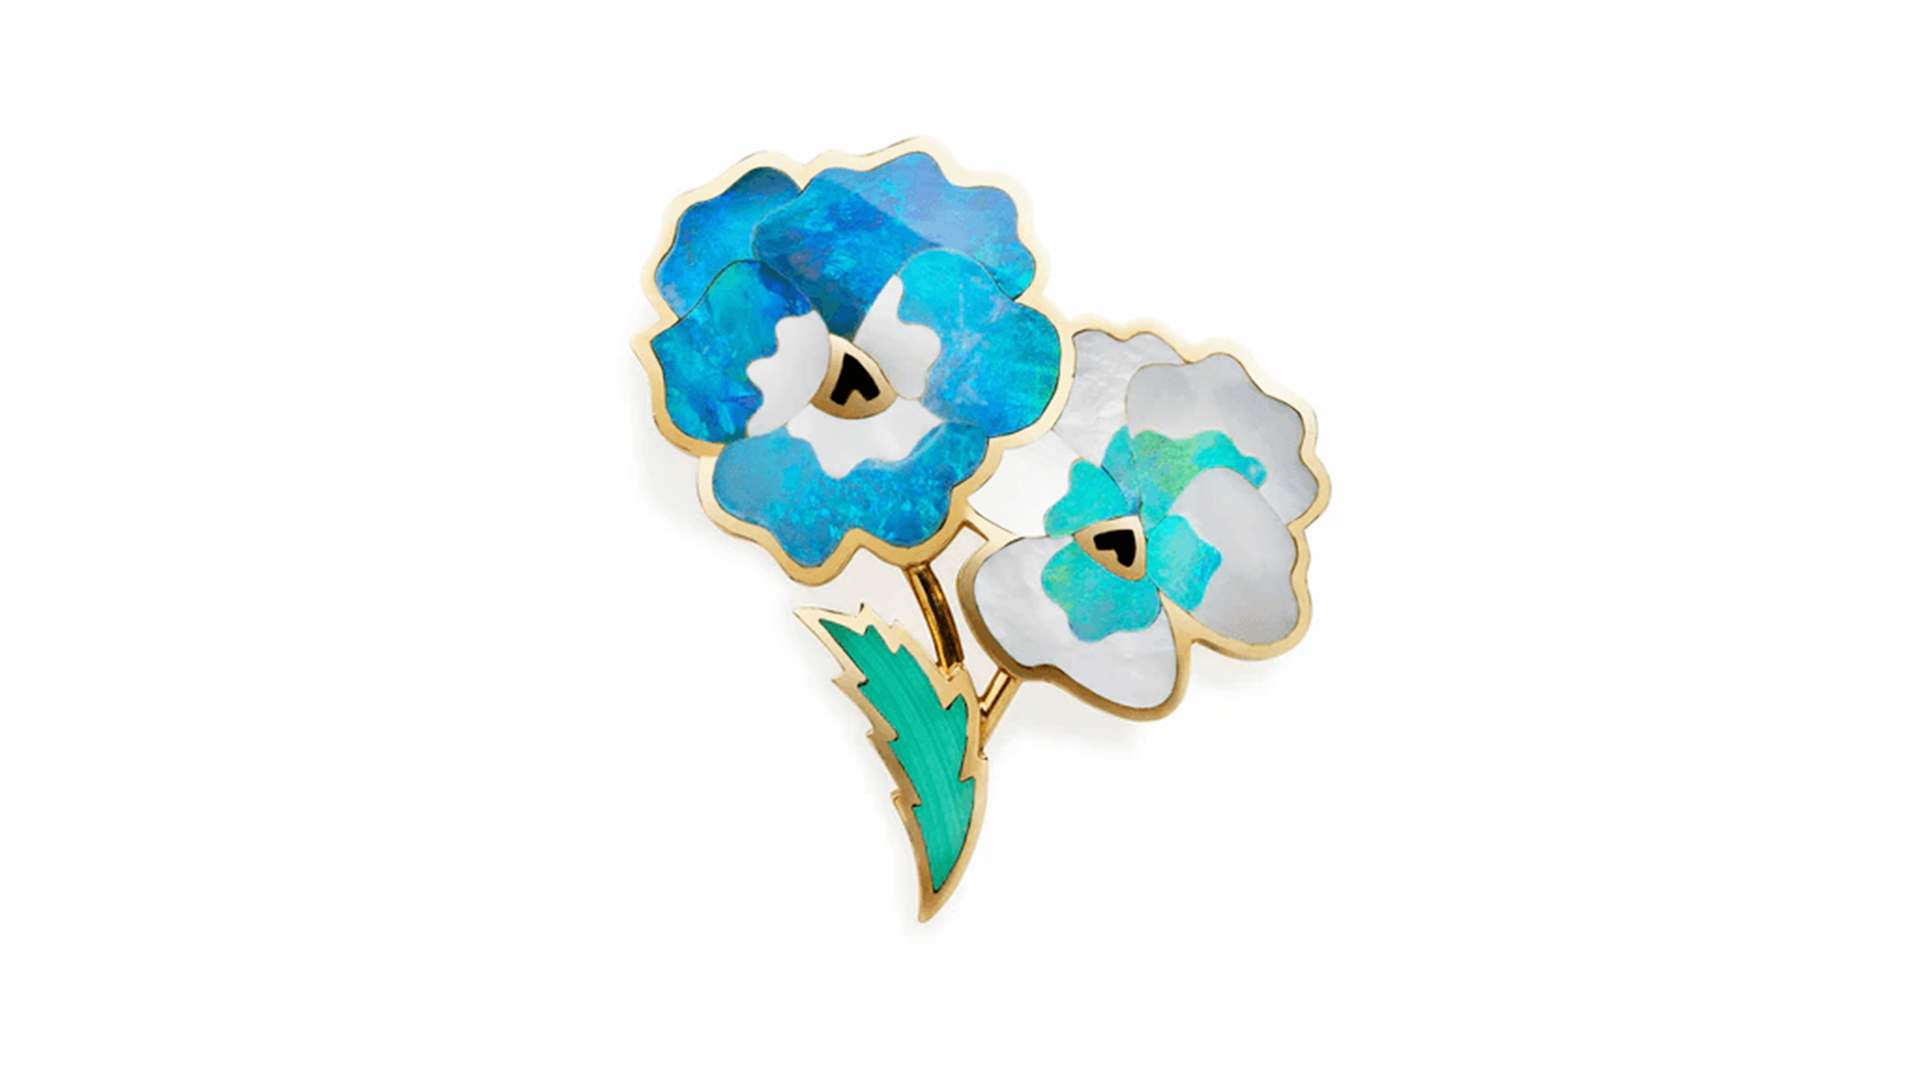 Opal, jade, malachite, mother of pearl and gold pansy brooch by Angela Cummings for Tiffany & Co., signed Tiffany & Co., circa early 1980s, courtesy, Macklowe Gallery (@macklowegallery).